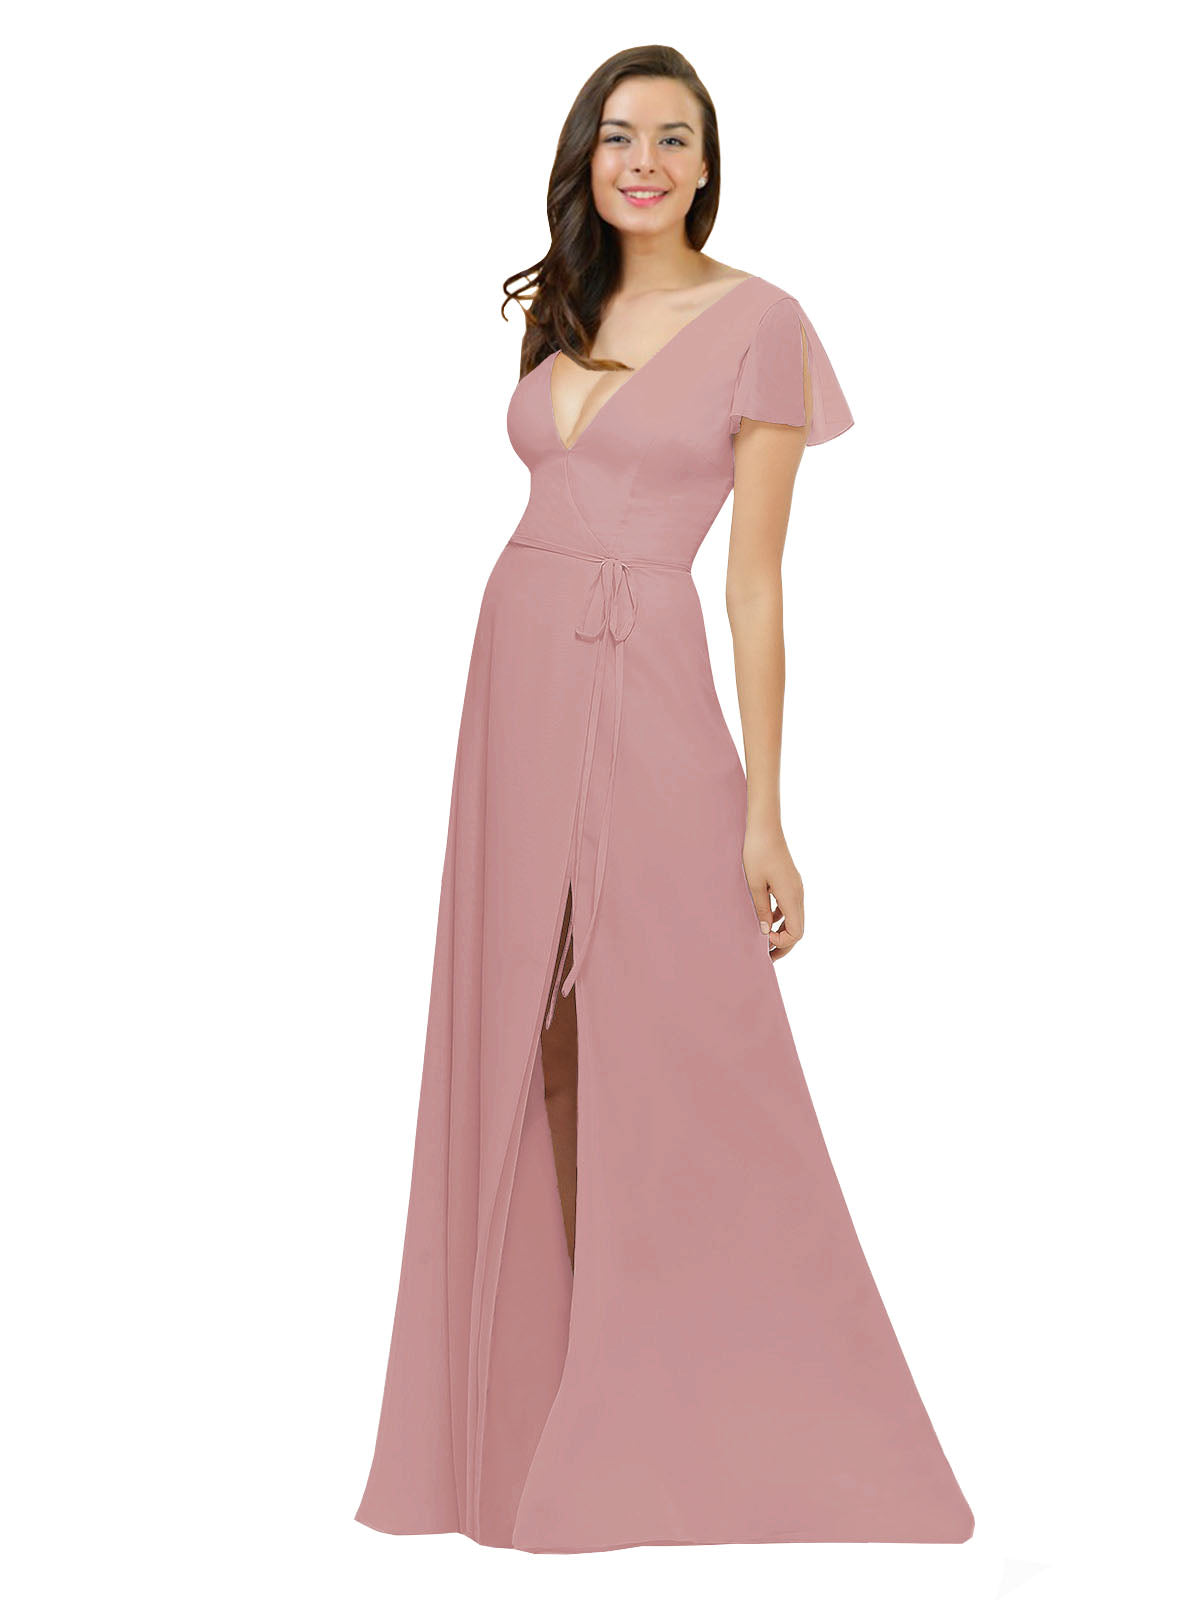 Dusty Pink A-Line V-Neck Cap Sleeves Long Bridesmaid Dress Dayna